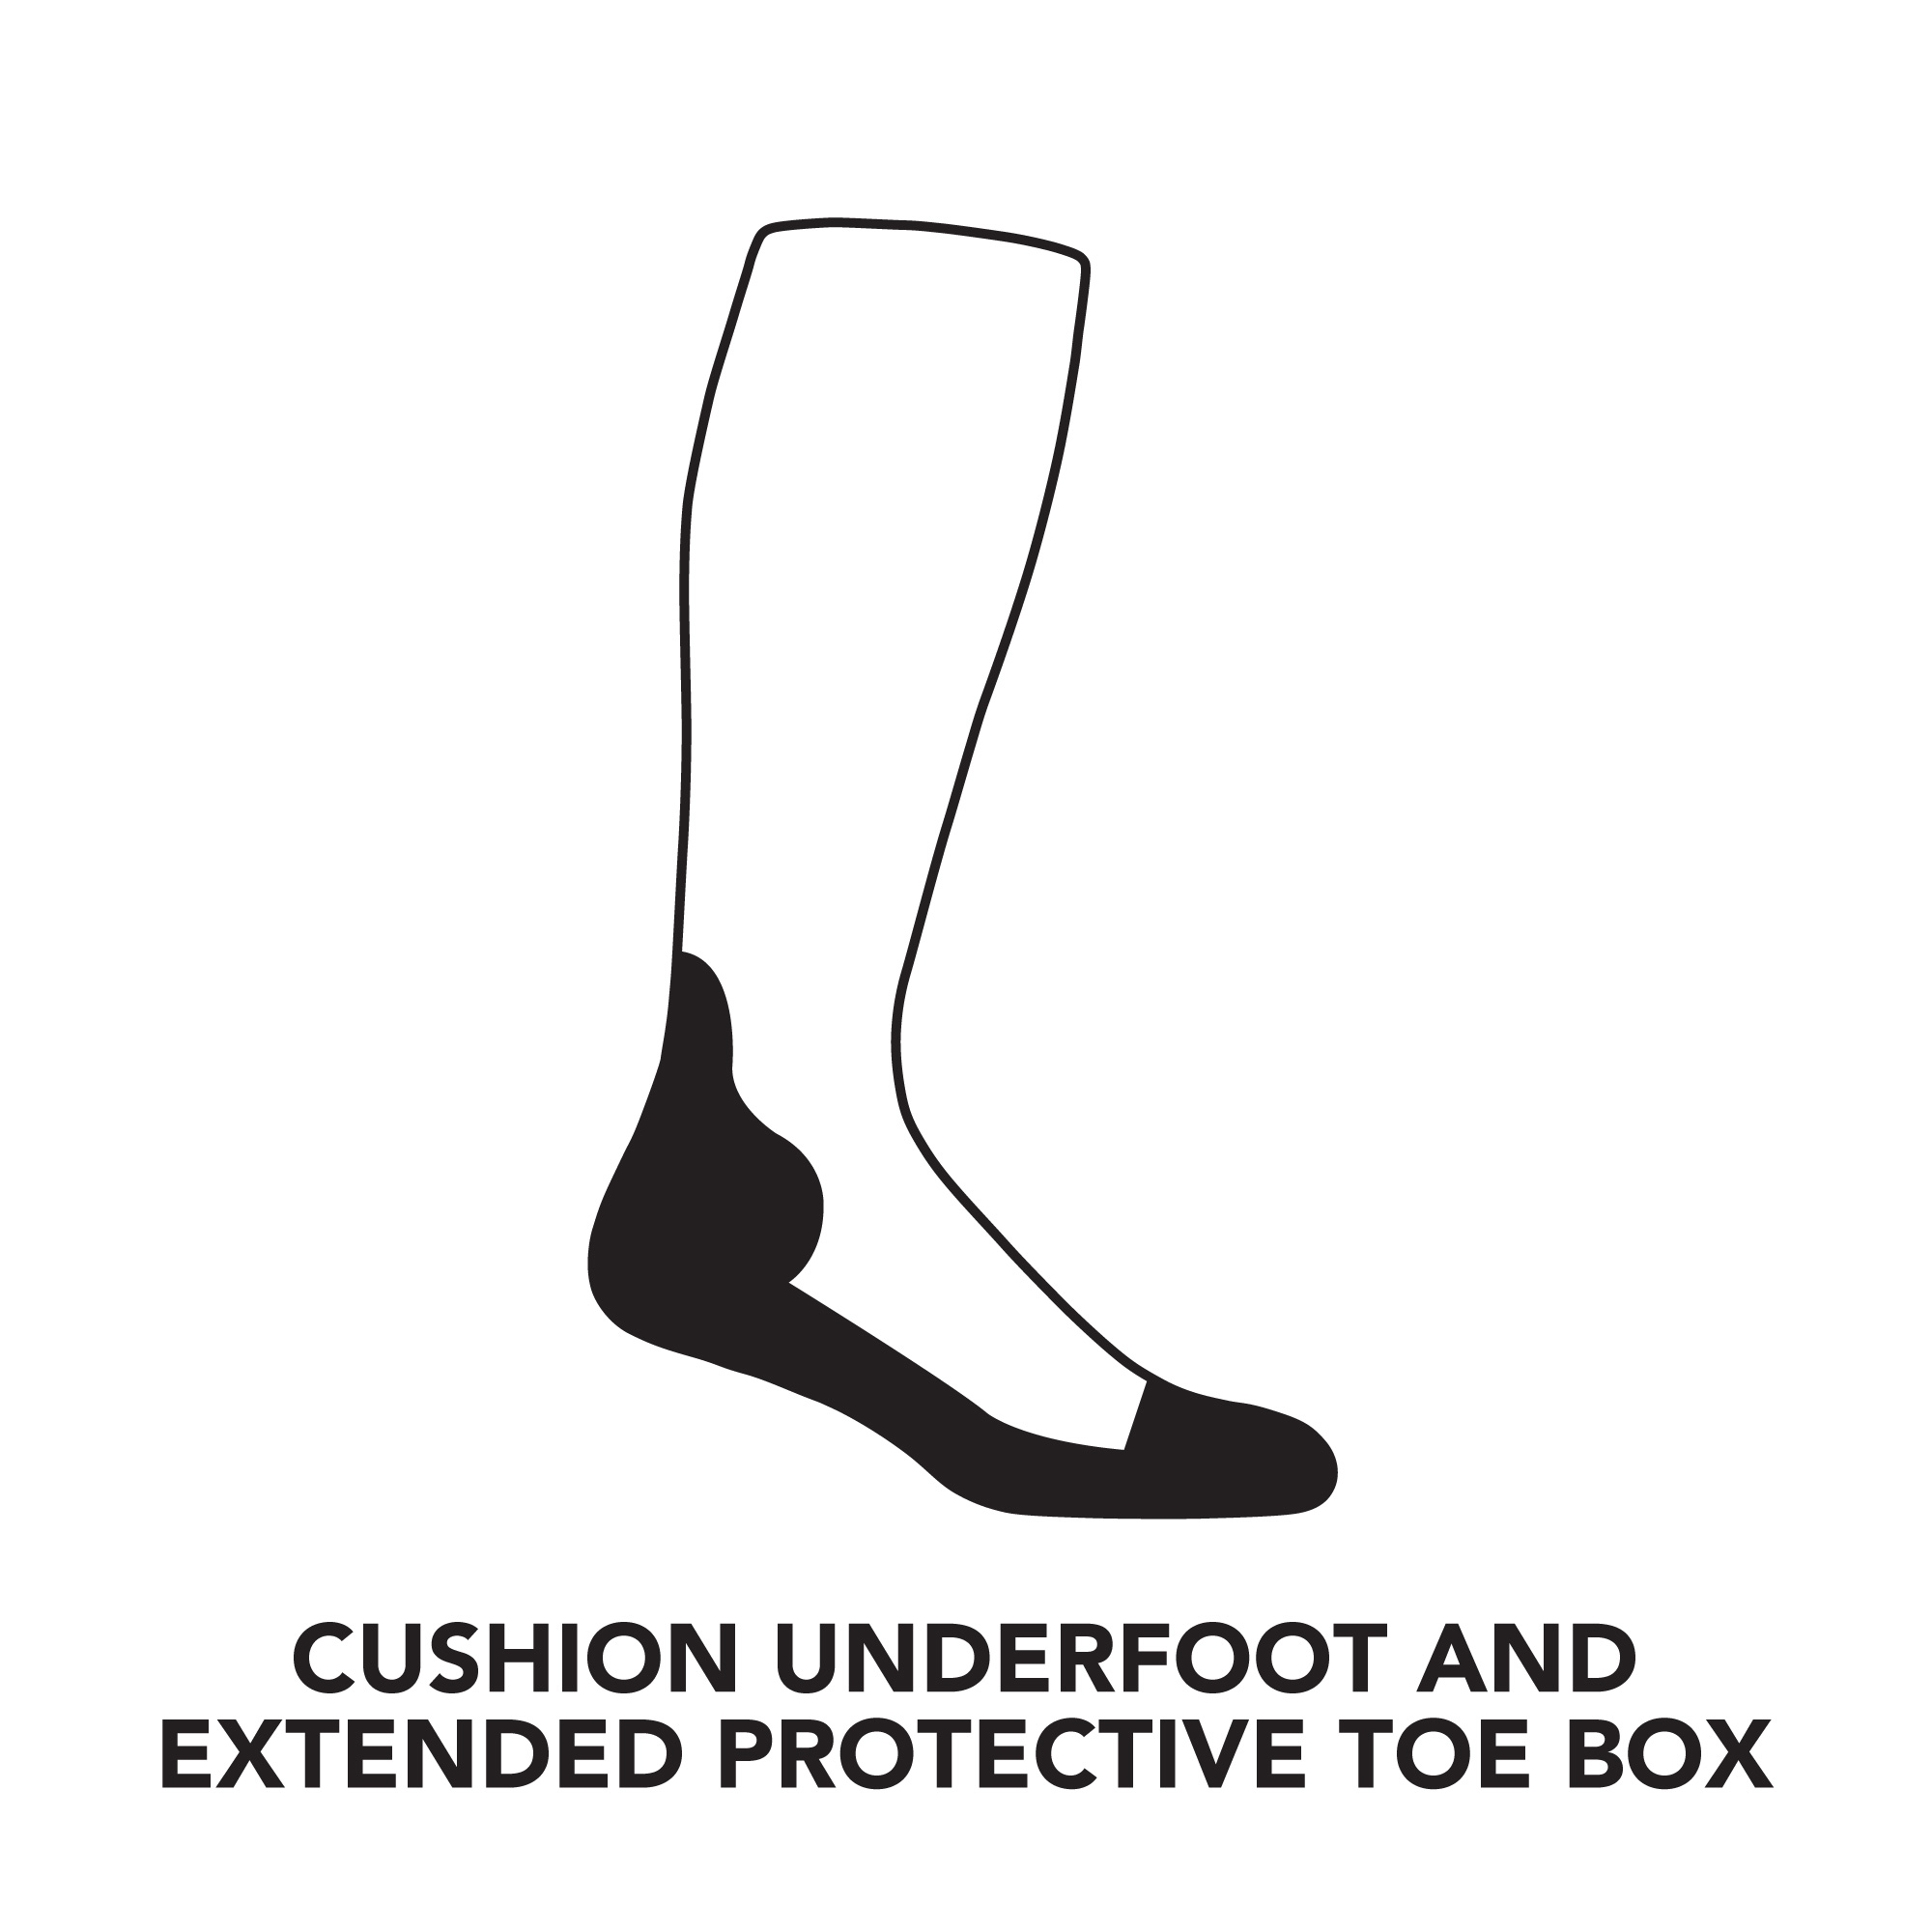 Cushion image describing that there is cushion on the underfoot and also an extended protective toe box